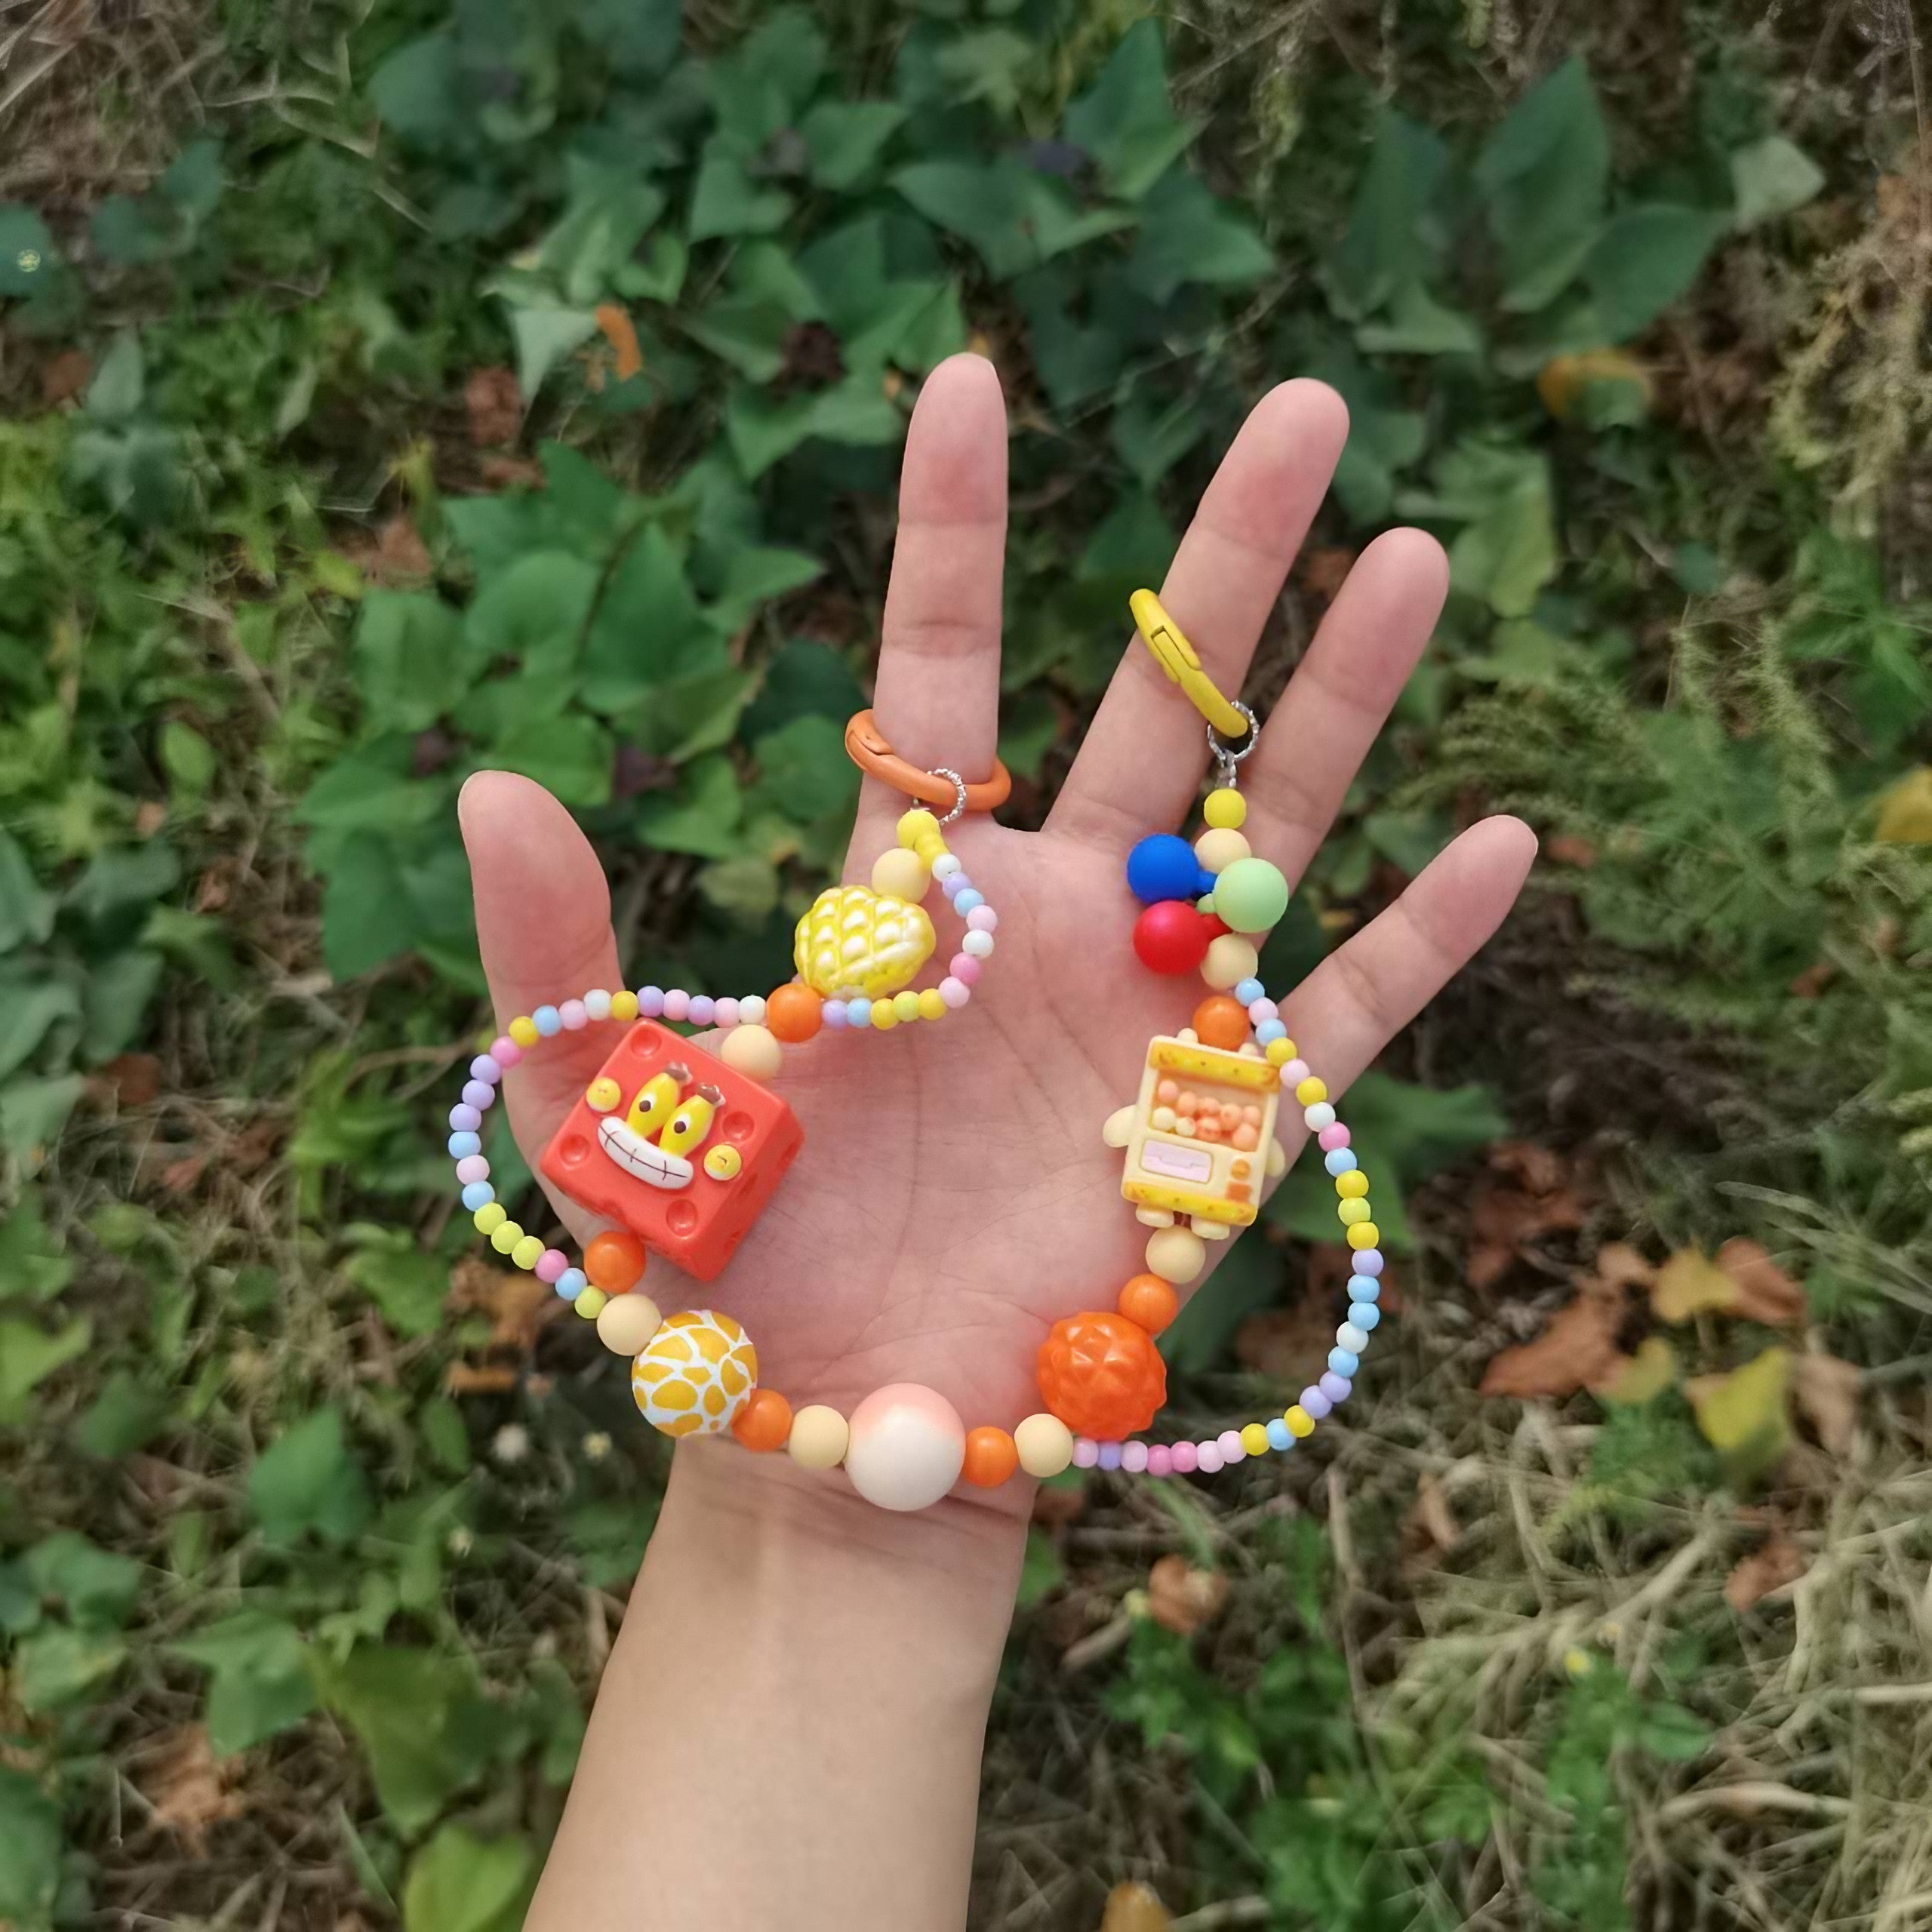 A person holding a SpongeBob keychain with yellow and orange beads